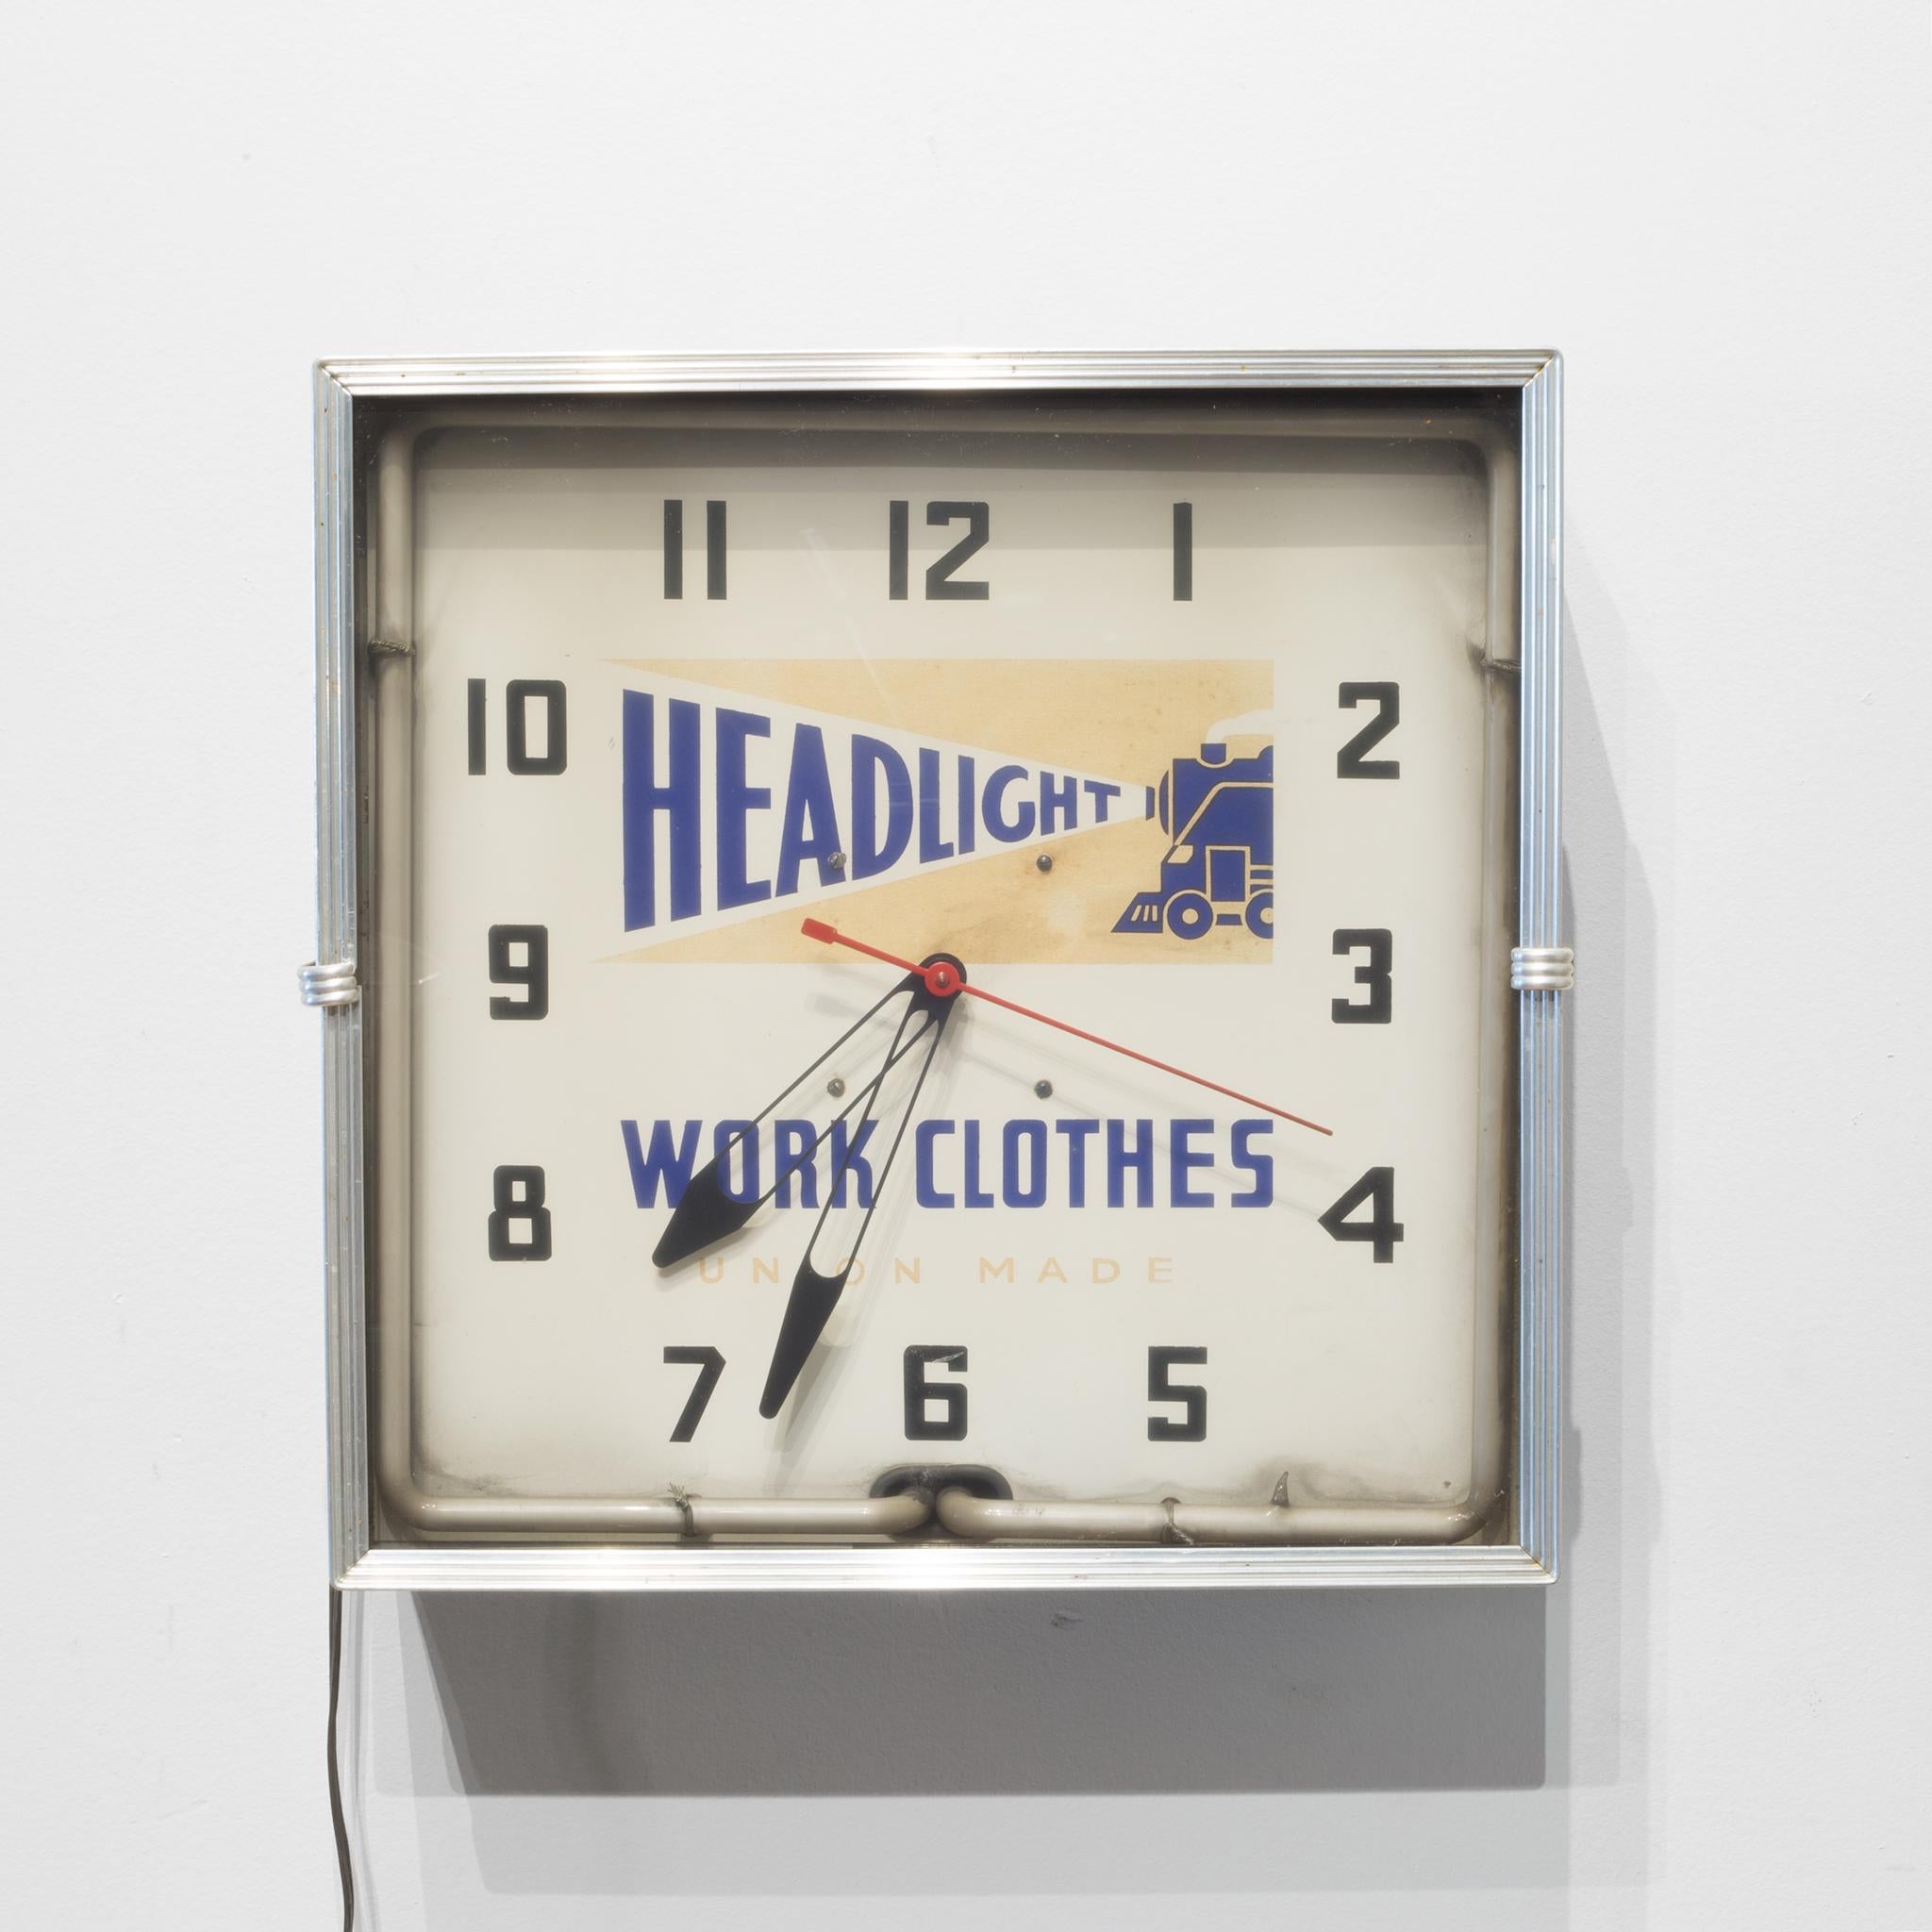 About

An original Headlight Work Clothes Union Made wall clock with Art Deco silver metal trim and neon lighting inside. The clock operates properly and the neon lighting is also fully functional. A date stamp on the back reads 